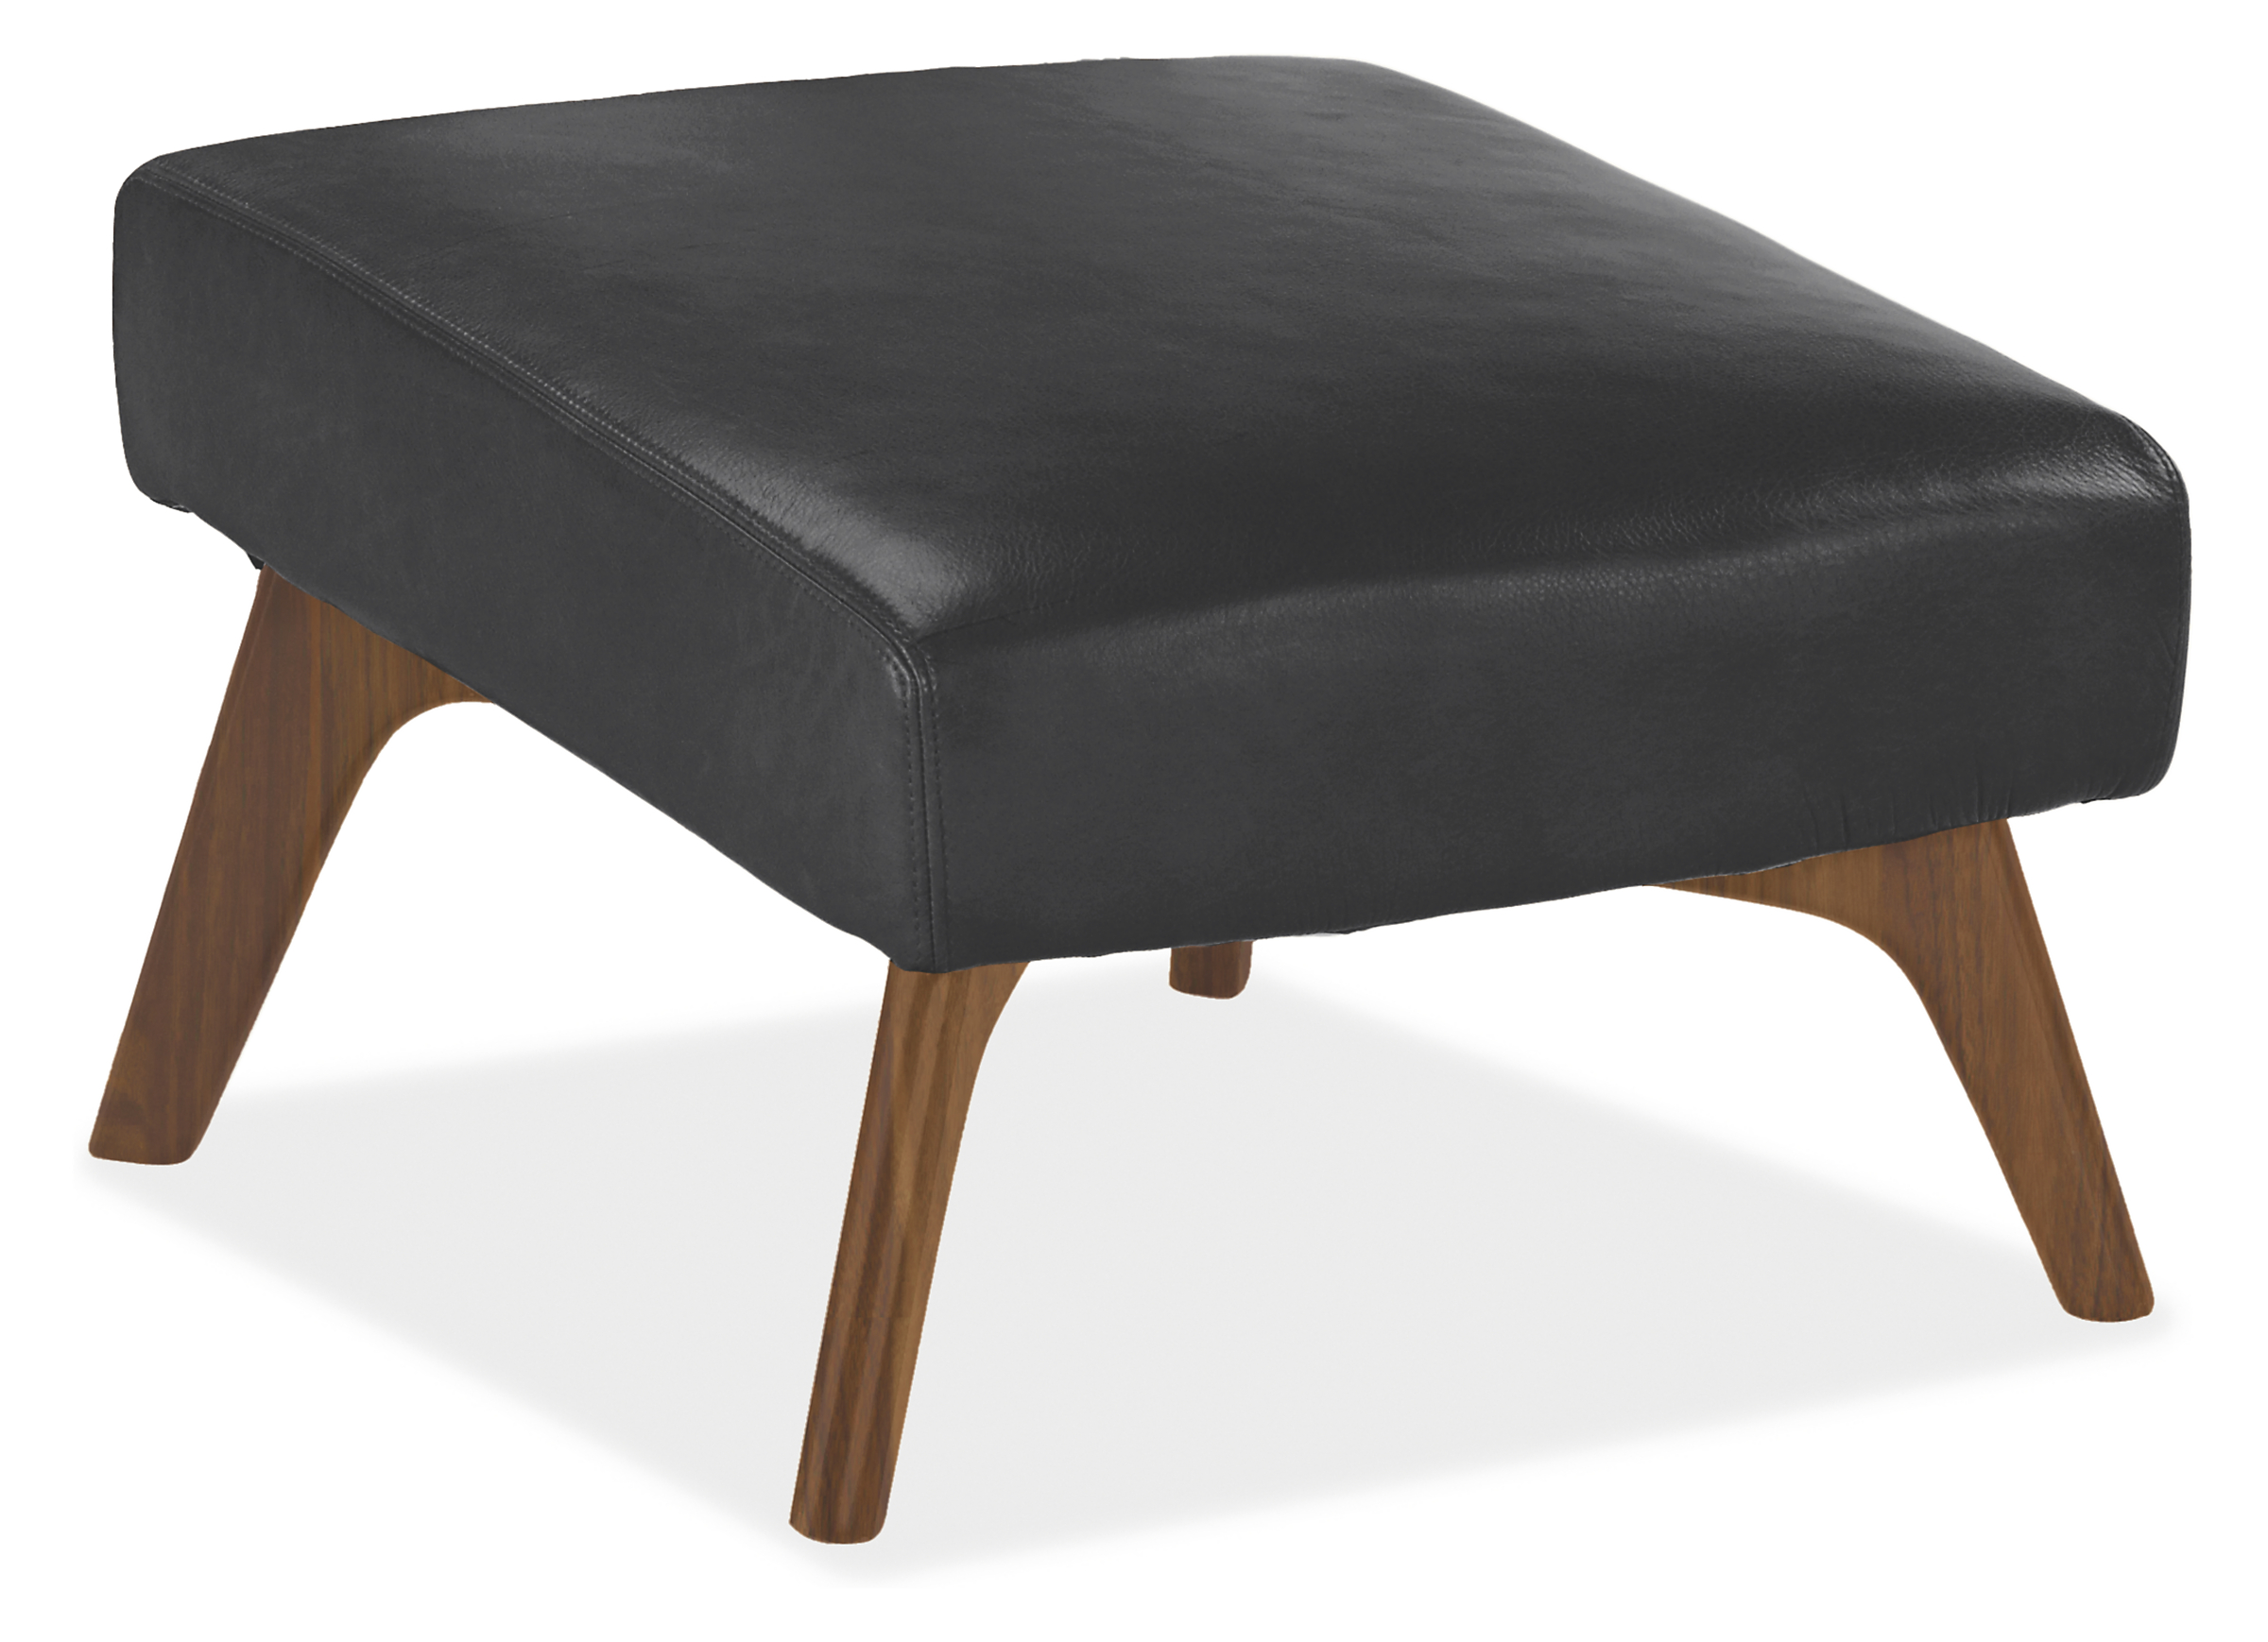 Boden 22w 22d 17h Ottoman in Lecco Black Leather with Walnut Base